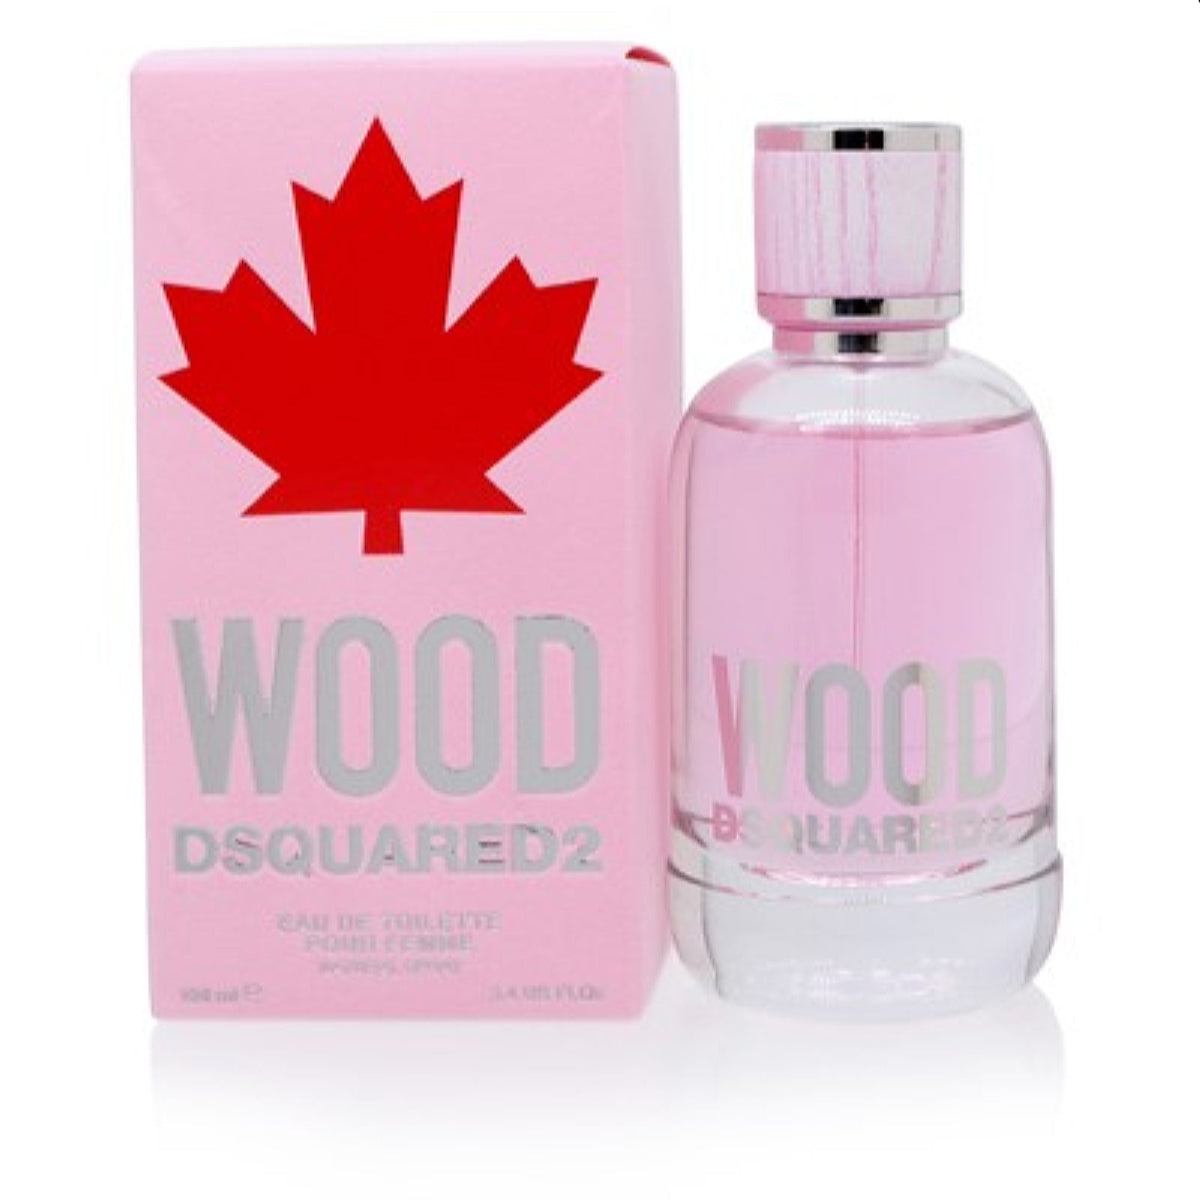 Wood Dsquared2 Edt Spray 3.4 Oz (100 Ml) For Women  5A32